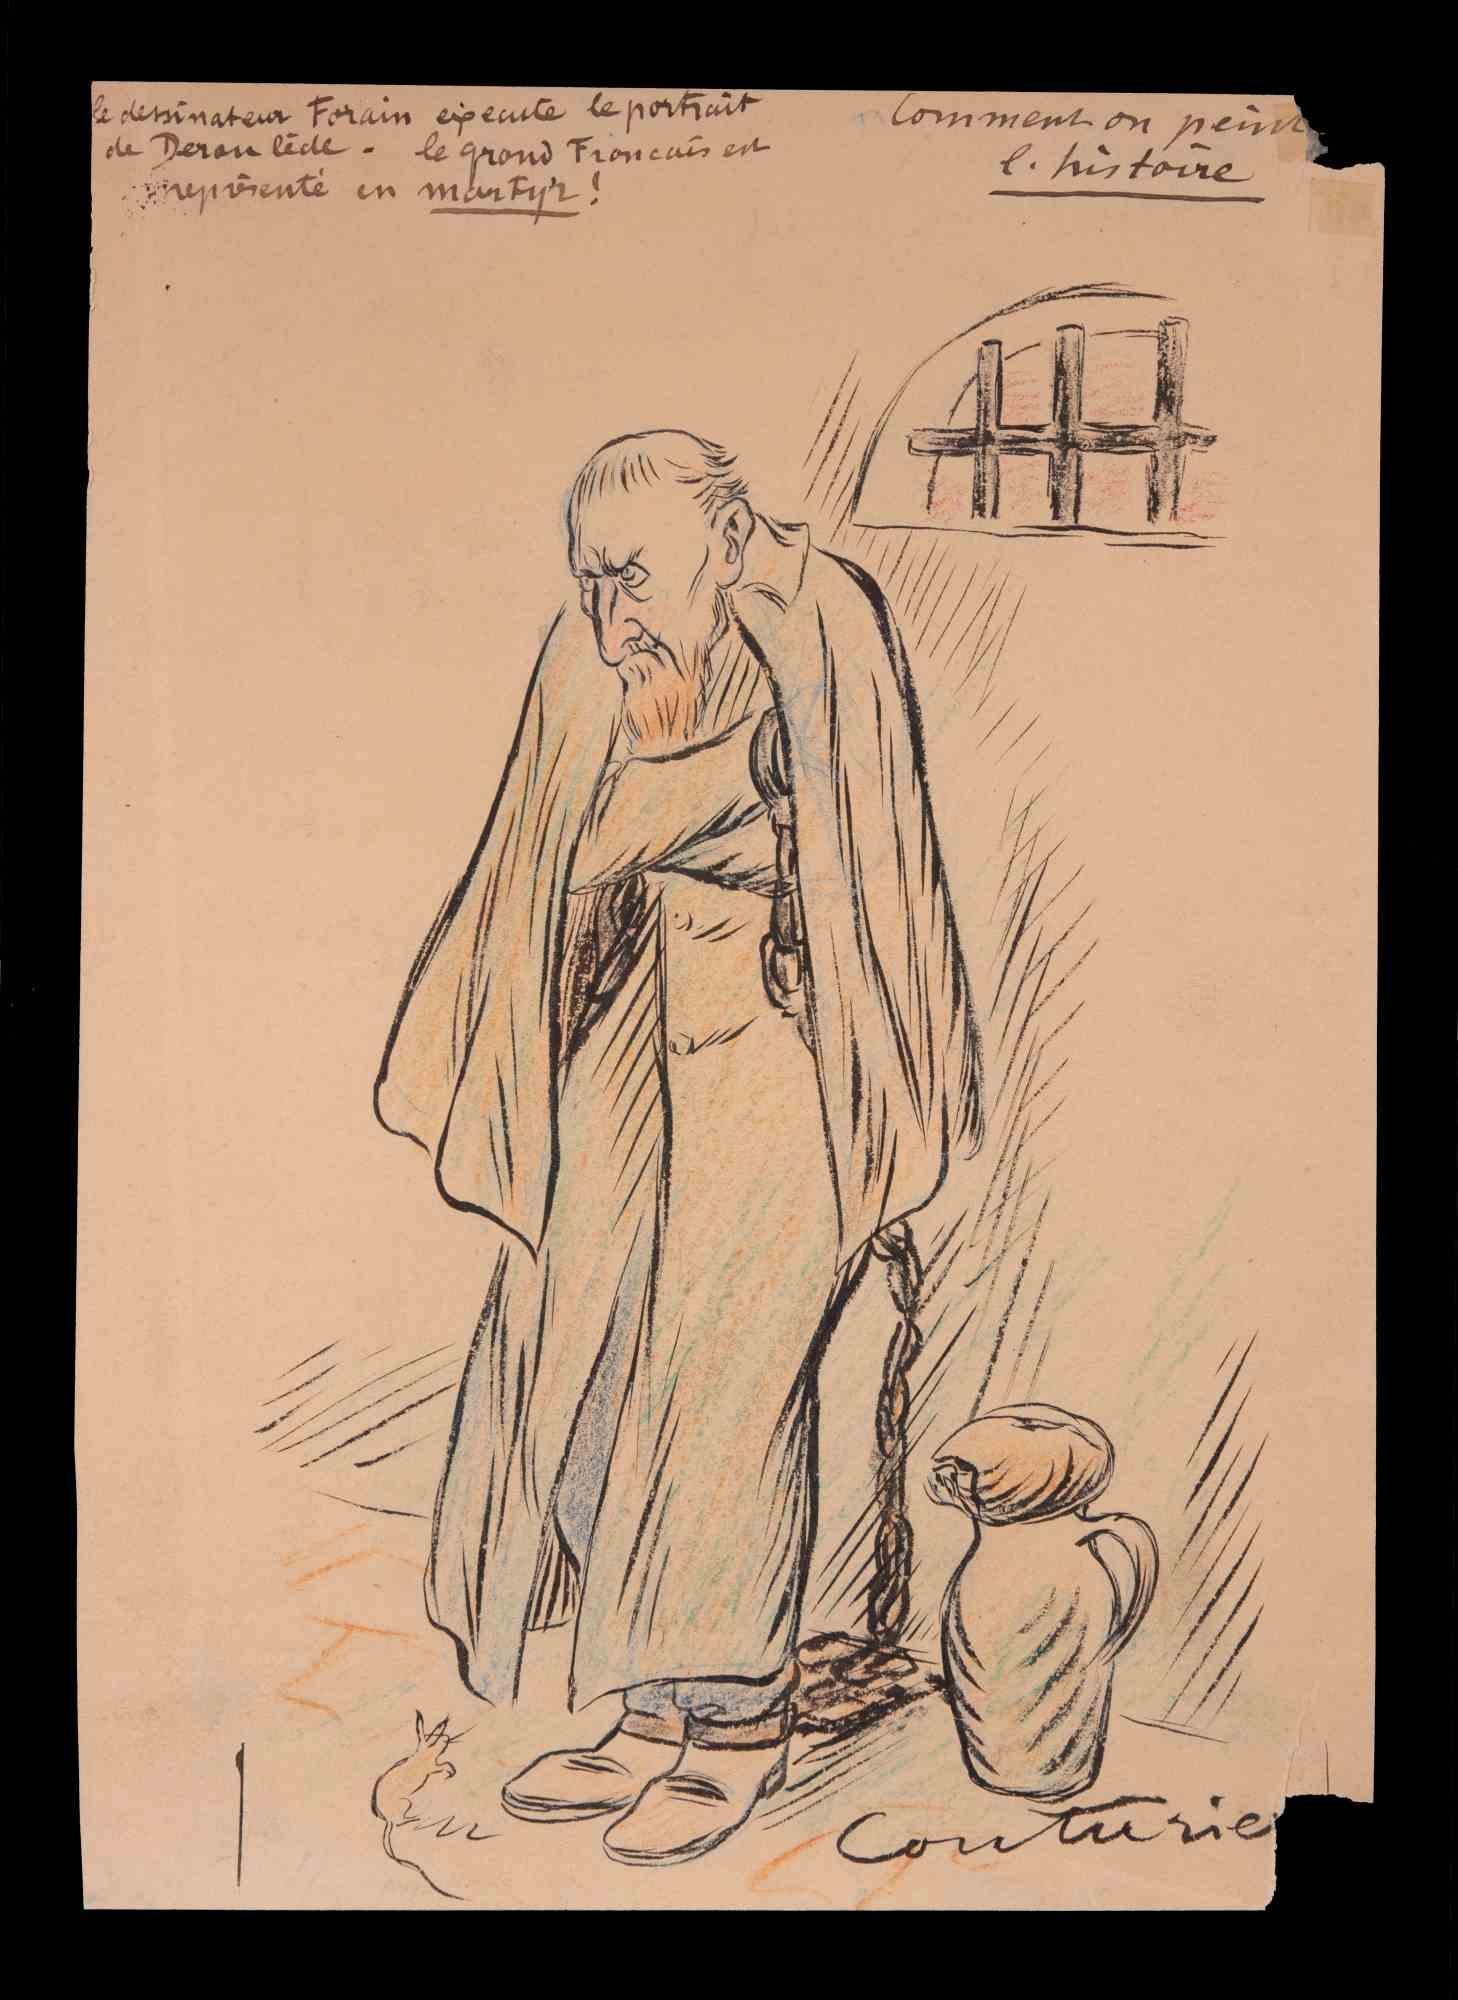 The Prisoner - Drawing by Léon Couturie - Early-20th Century